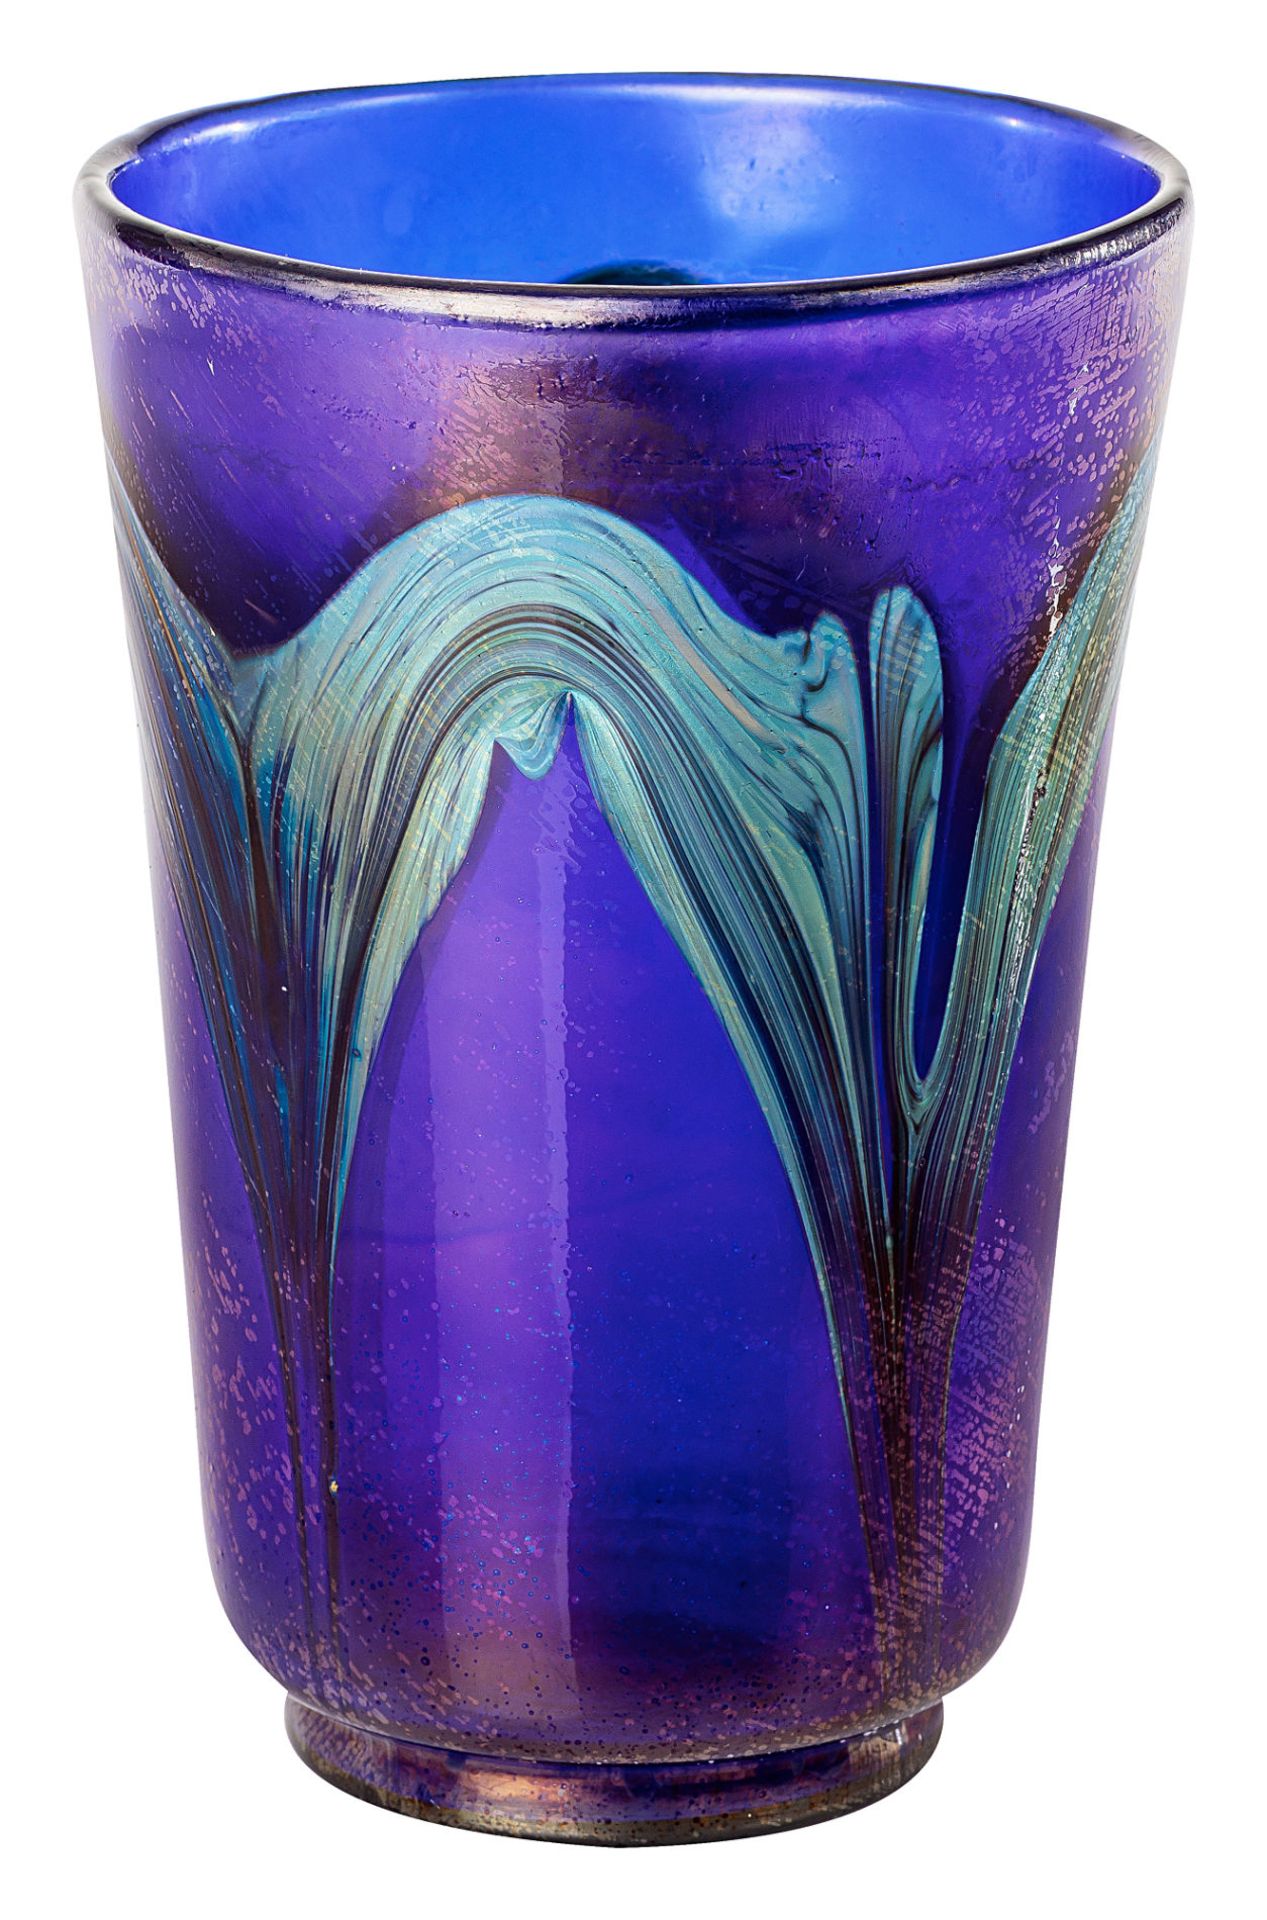 Conical vase with iridescent decor